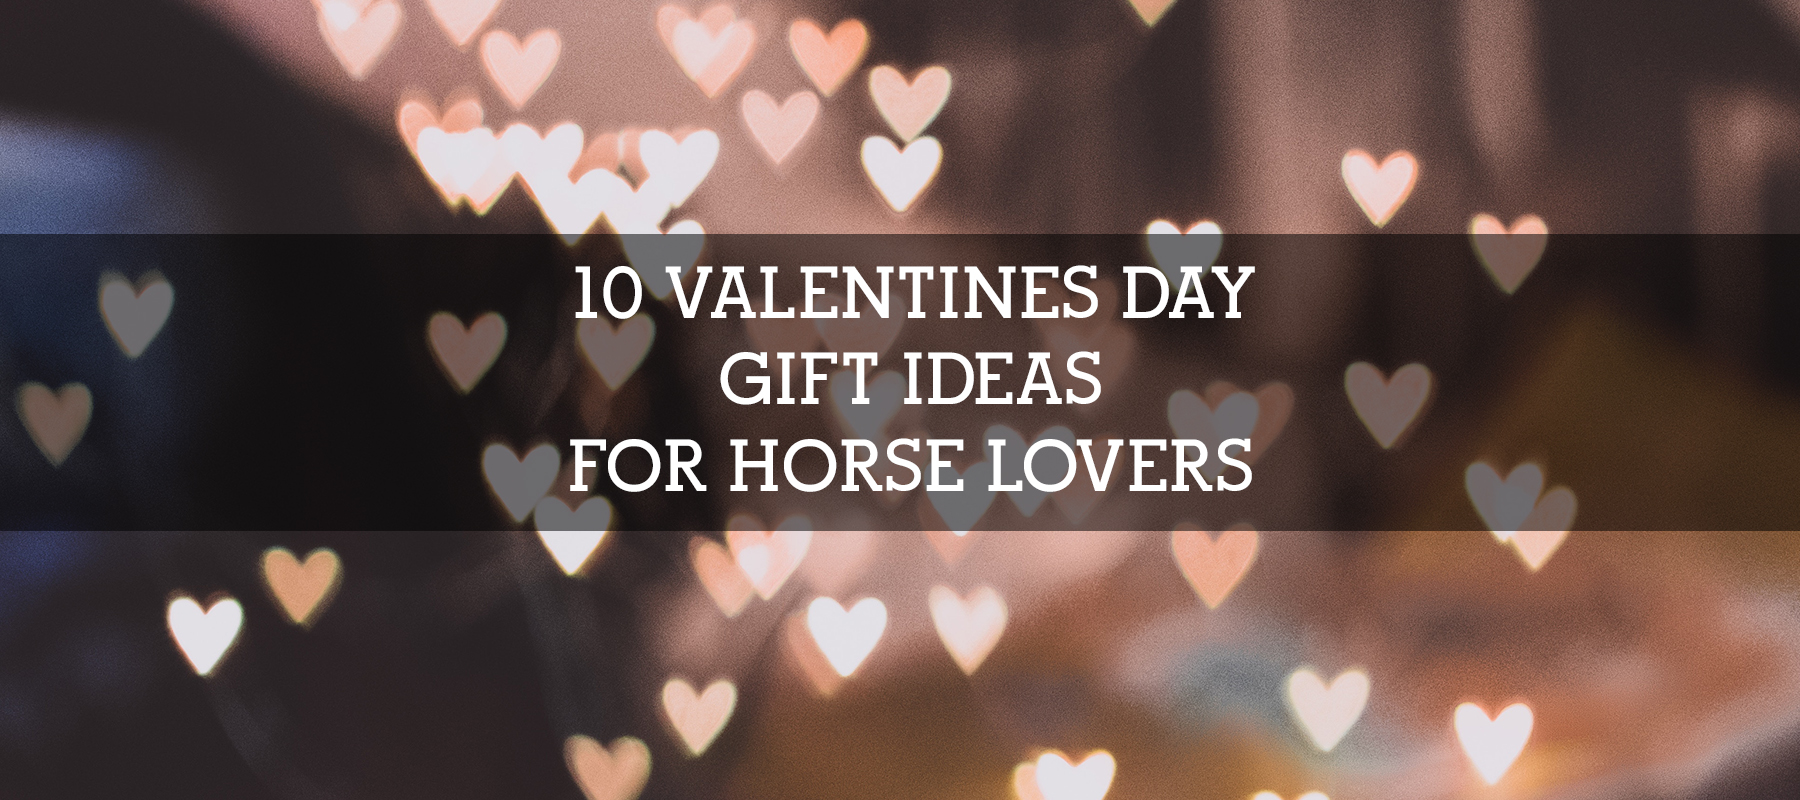 10 VALENTINES DAY GIFT IDEAS FOR HORSE LOVERS